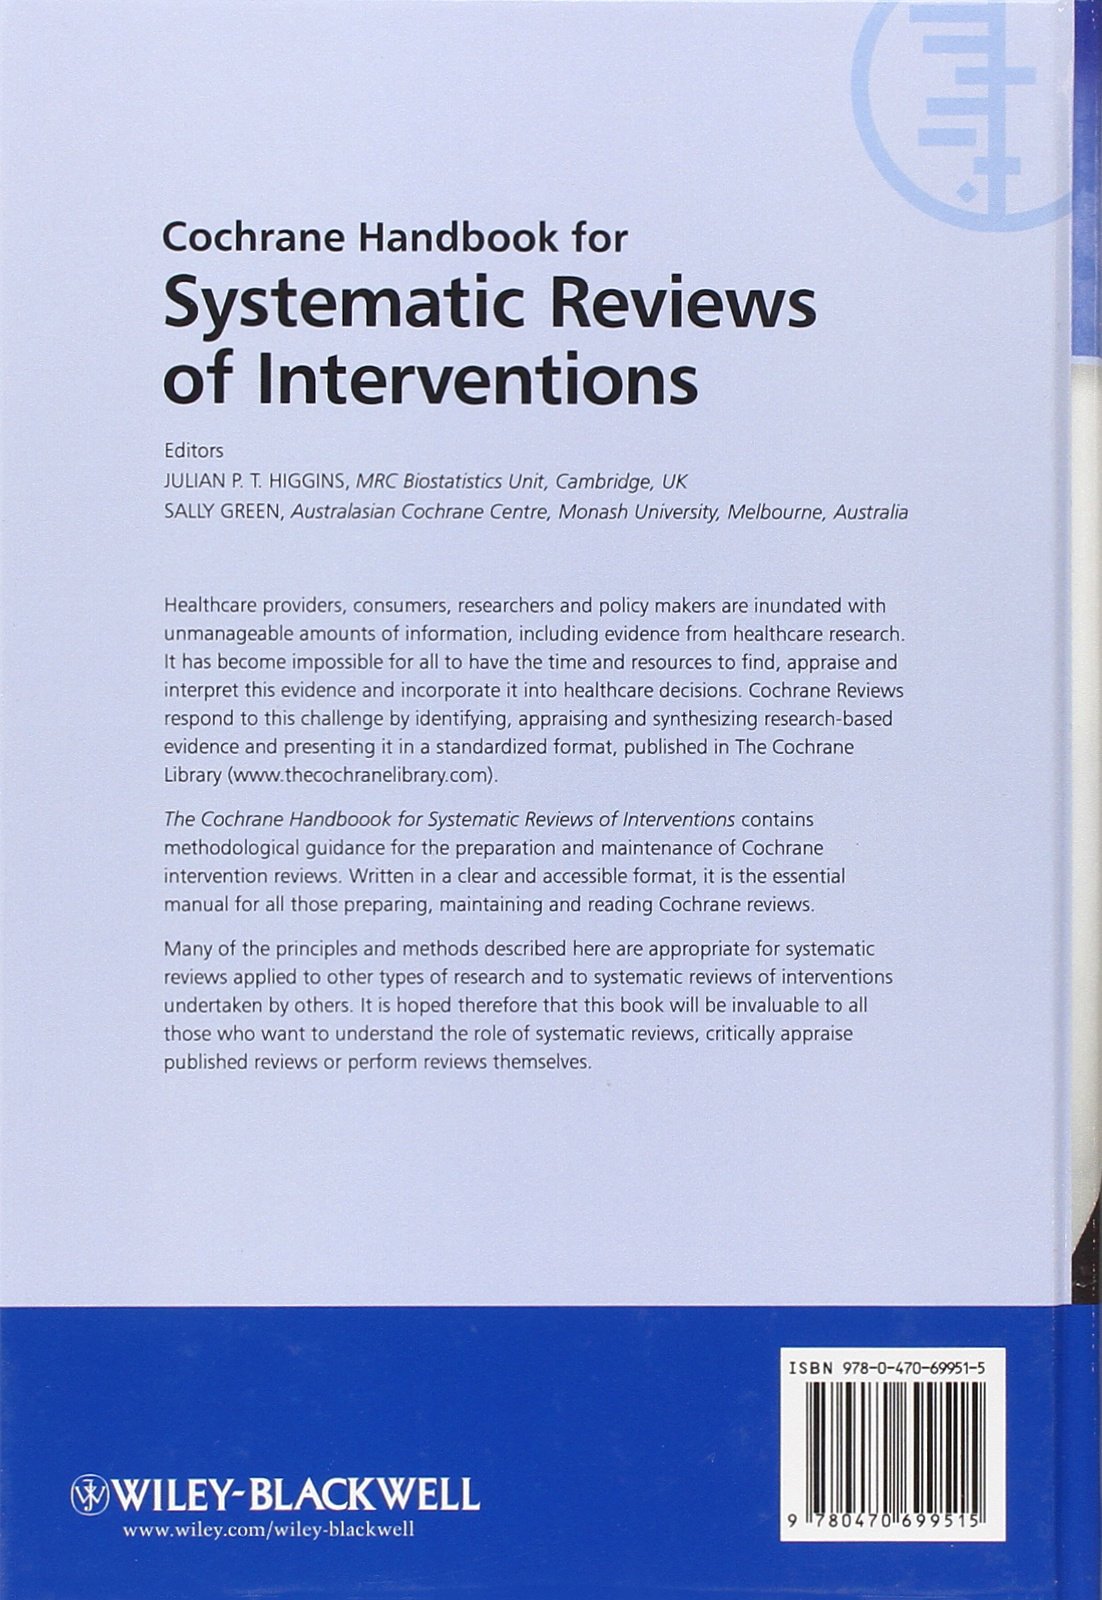 Cochrane handbook for systematic reviews of interventions 2017 pdf